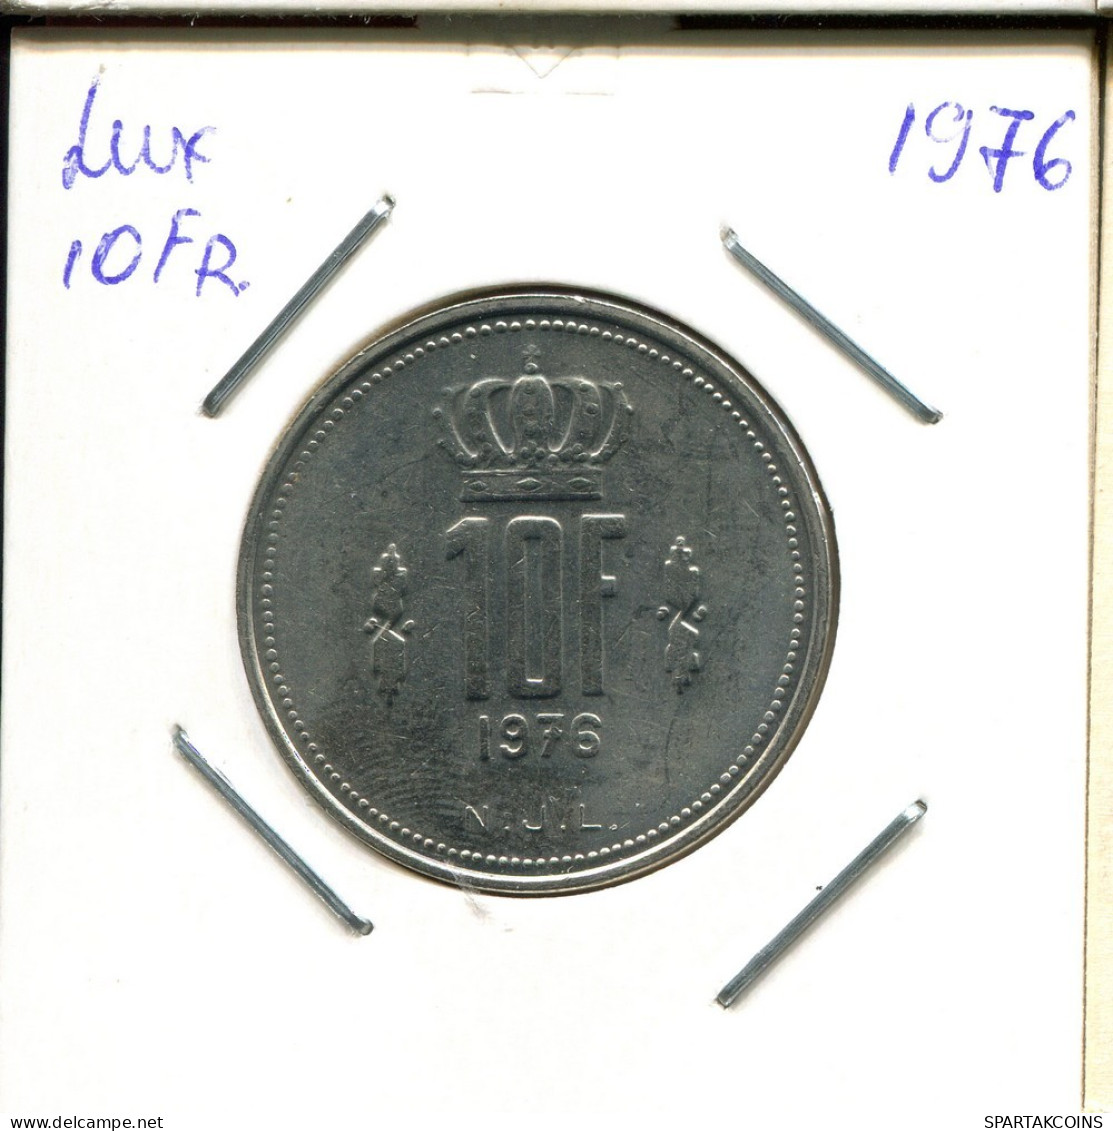 10 FRANCS 1976 LUXEMBURGO LUXEMBOURG Moneda #AT241.E.A - Luxemburg